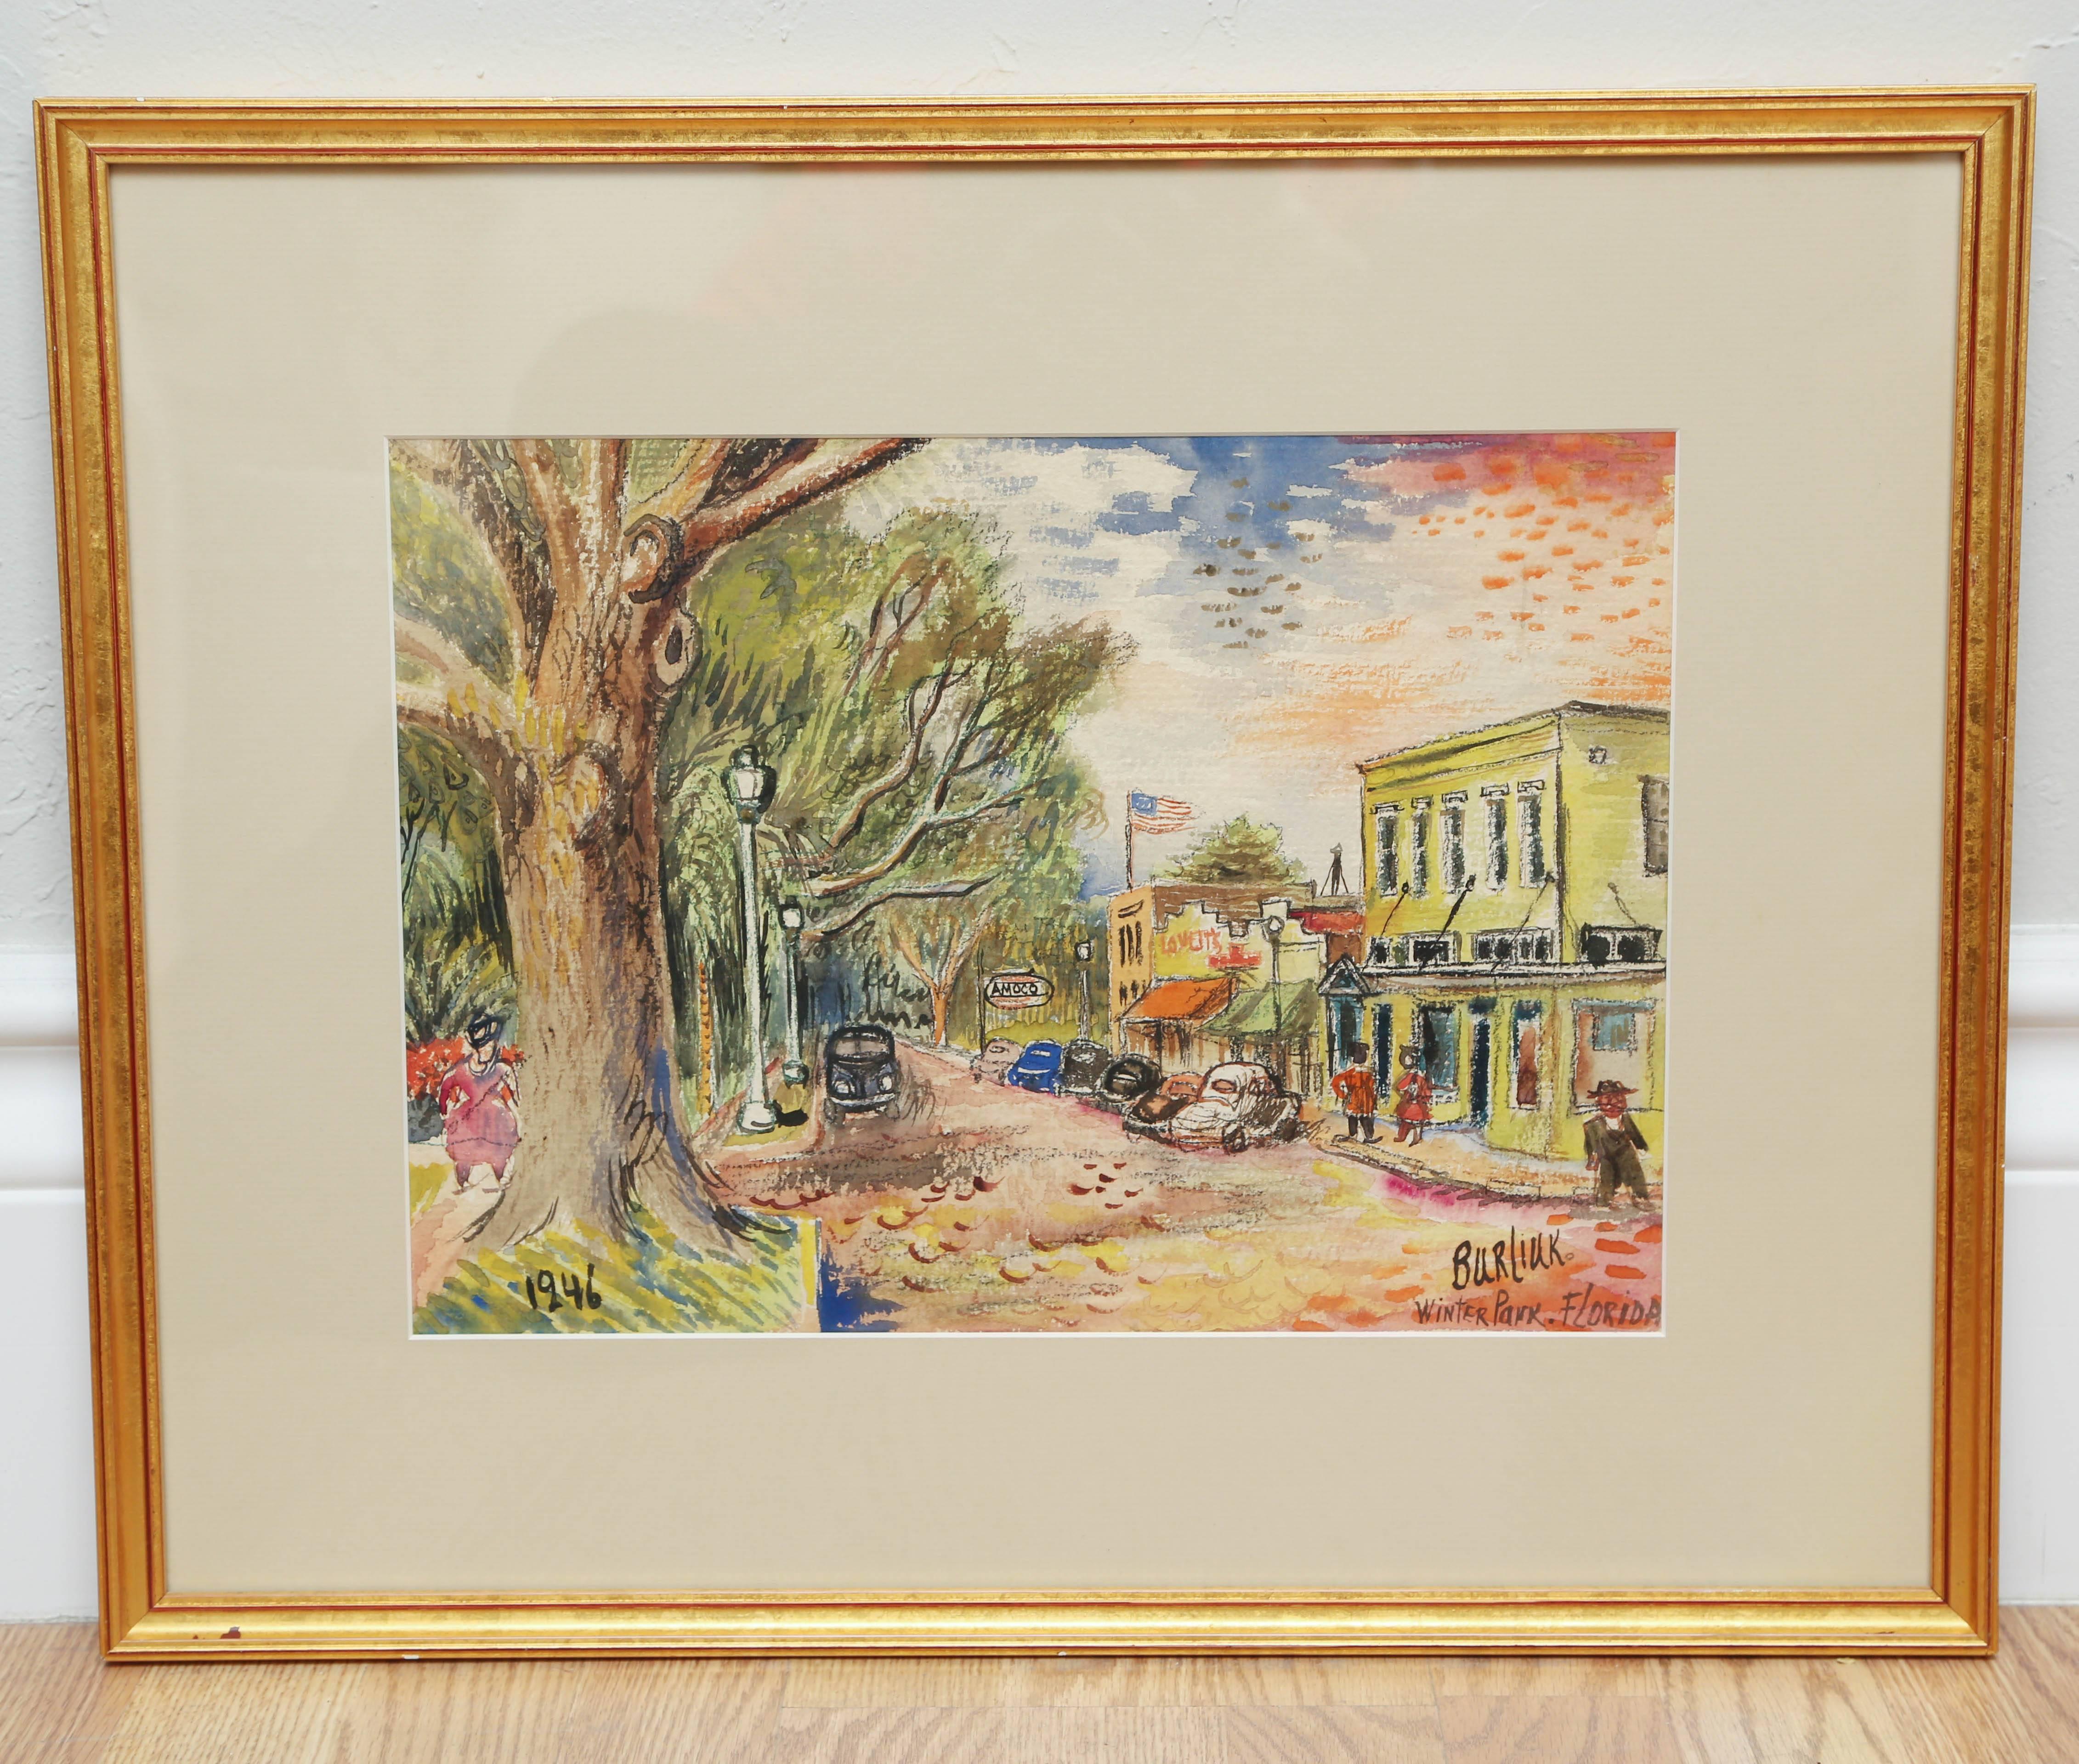 Beautiful landscape watercolor of the main street in Winter Park, Florida in 1946.
Image size 10.5